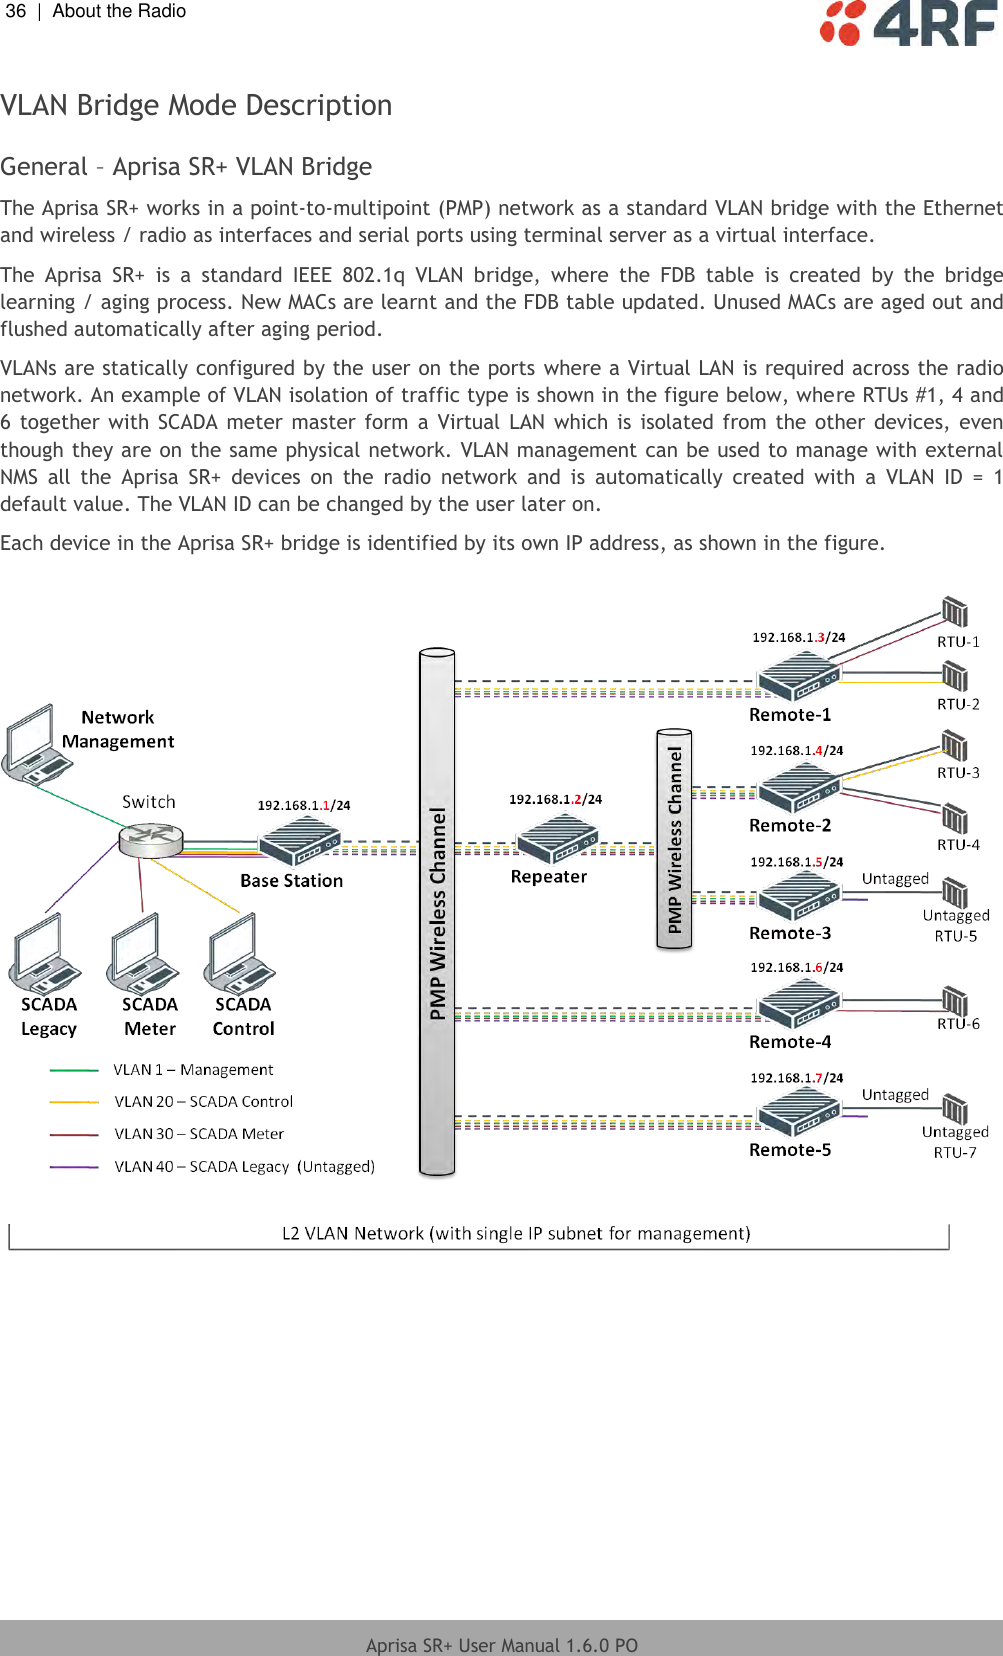 36  |  About the Radio   Aprisa SR+ User Manual 1.6.0 PO  VLAN Bridge Mode Description  General – Aprisa SR+ VLAN Bridge The Aprisa SR+ works in a point-to-multipoint (PMP) network as a standard VLAN bridge with the Ethernet and wireless / radio as interfaces and serial ports using terminal server as a virtual interface. The  Aprisa  SR+  is  a  standard  IEEE  802.1q  VLAN  bridge,  where  the  FDB  table  is  created  by  the  bridge learning / aging process. New MACs are learnt and the FDB table updated. Unused MACs are aged out and flushed automatically after aging period. VLANs are statically configured by the user on the ports where a Virtual LAN is required across the radio network. An example of VLAN isolation of traffic type is shown in the figure below, where RTUs #1, 4 and 6 together with SCADA  meter  master form  a  Virtual LAN  which  is  isolated from the other devices,  even though they are on the same physical network. VLAN management can be used to manage with external NMS  all  the  Aprisa  SR+  devices  on  the  radio  network  and  is  automatically  created  with  a  VLAN  ID  =  1 default value. The VLAN ID can be changed by the user later on. Each device in the Aprisa SR+ bridge is identified by its own IP address, as shown in the figure.    